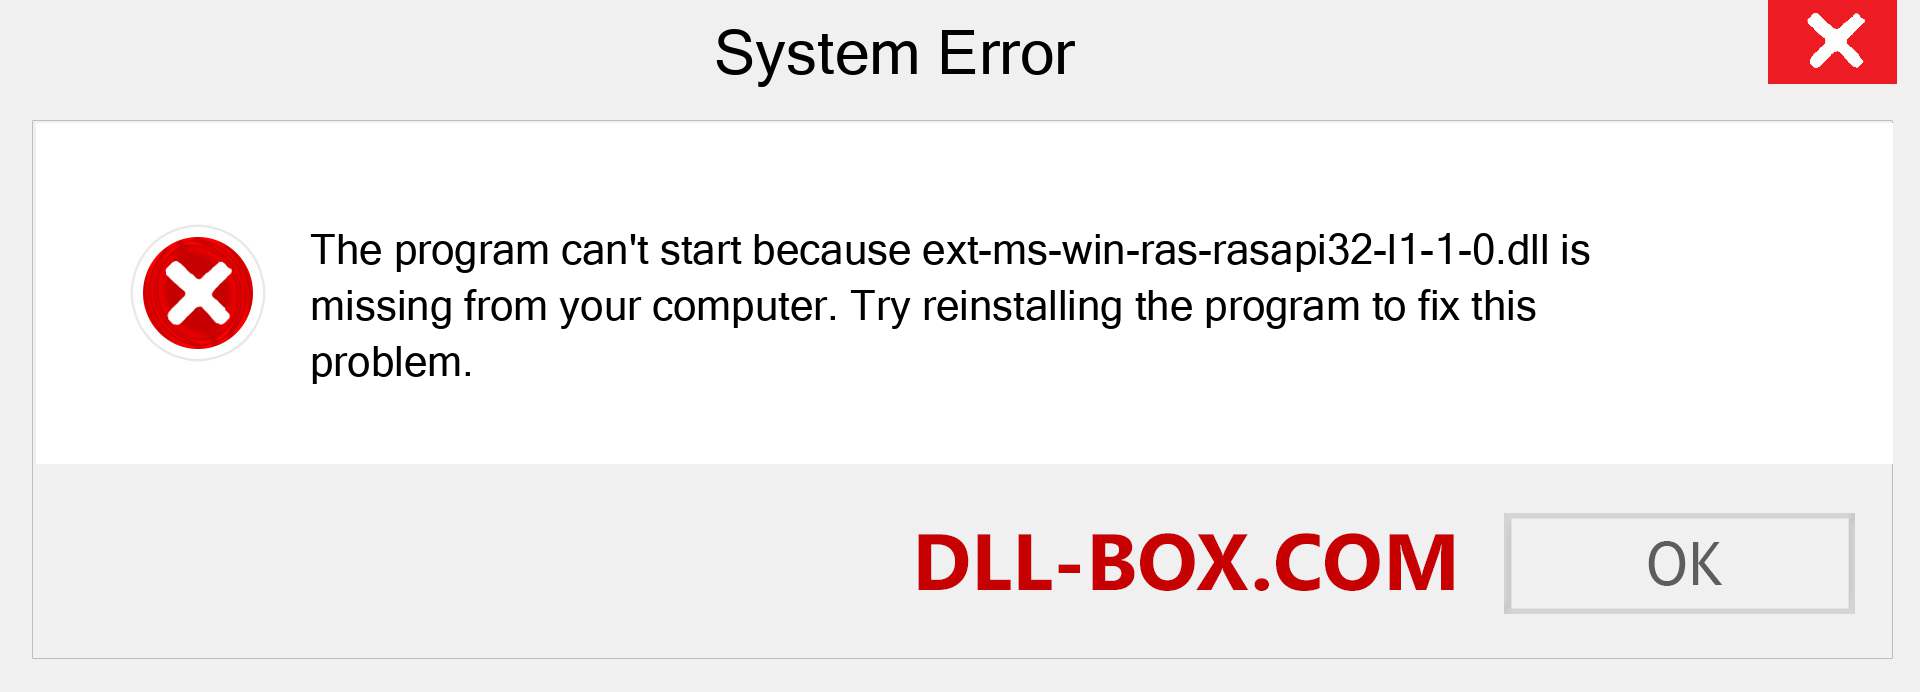  ext-ms-win-ras-rasapi32-l1-1-0.dll file is missing?. Download for Windows 7, 8, 10 - Fix  ext-ms-win-ras-rasapi32-l1-1-0 dll Missing Error on Windows, photos, images